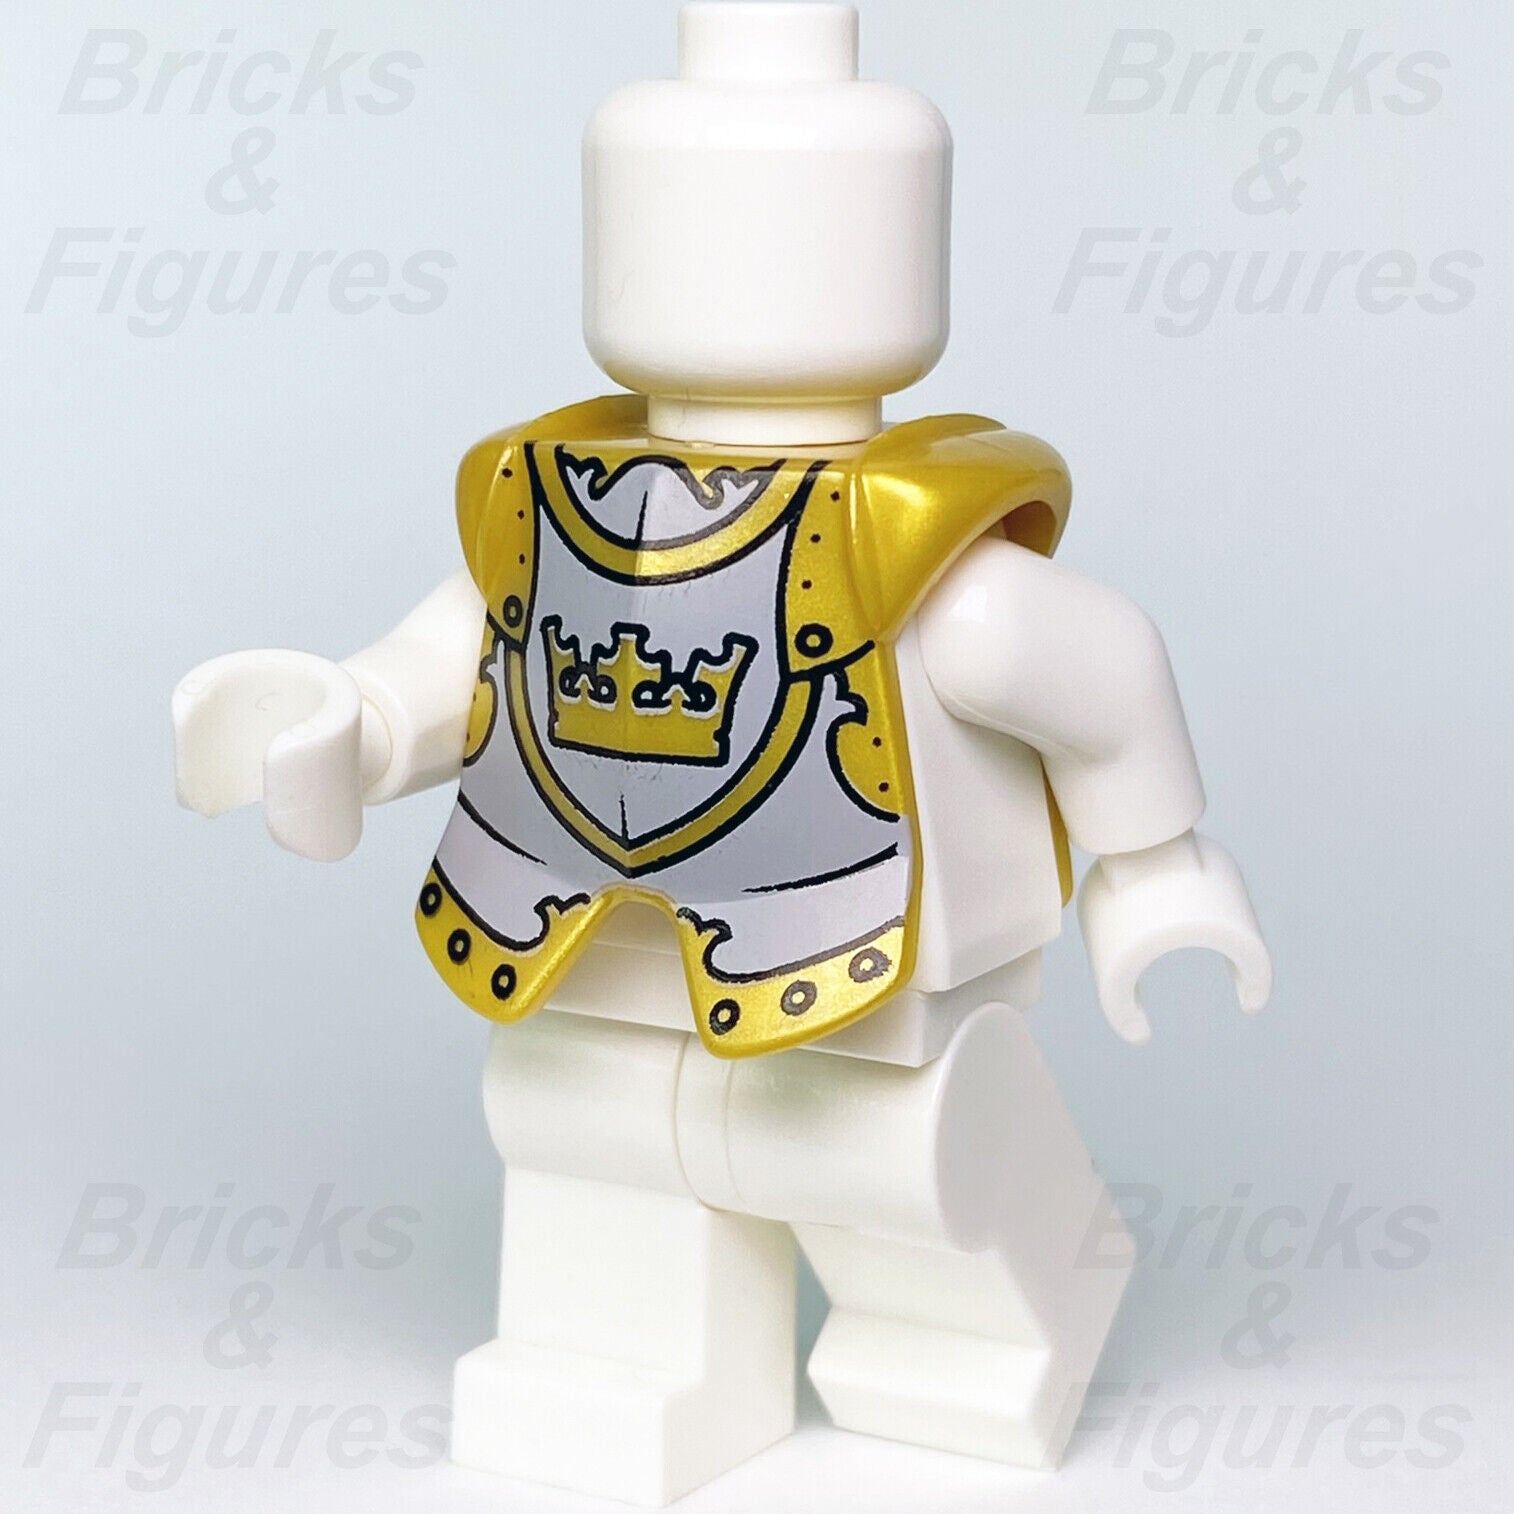 LEGO Gold Knight Crown Breastplate Armour Castle Minifigure Part 2587pb22 New - Bricks & Figures